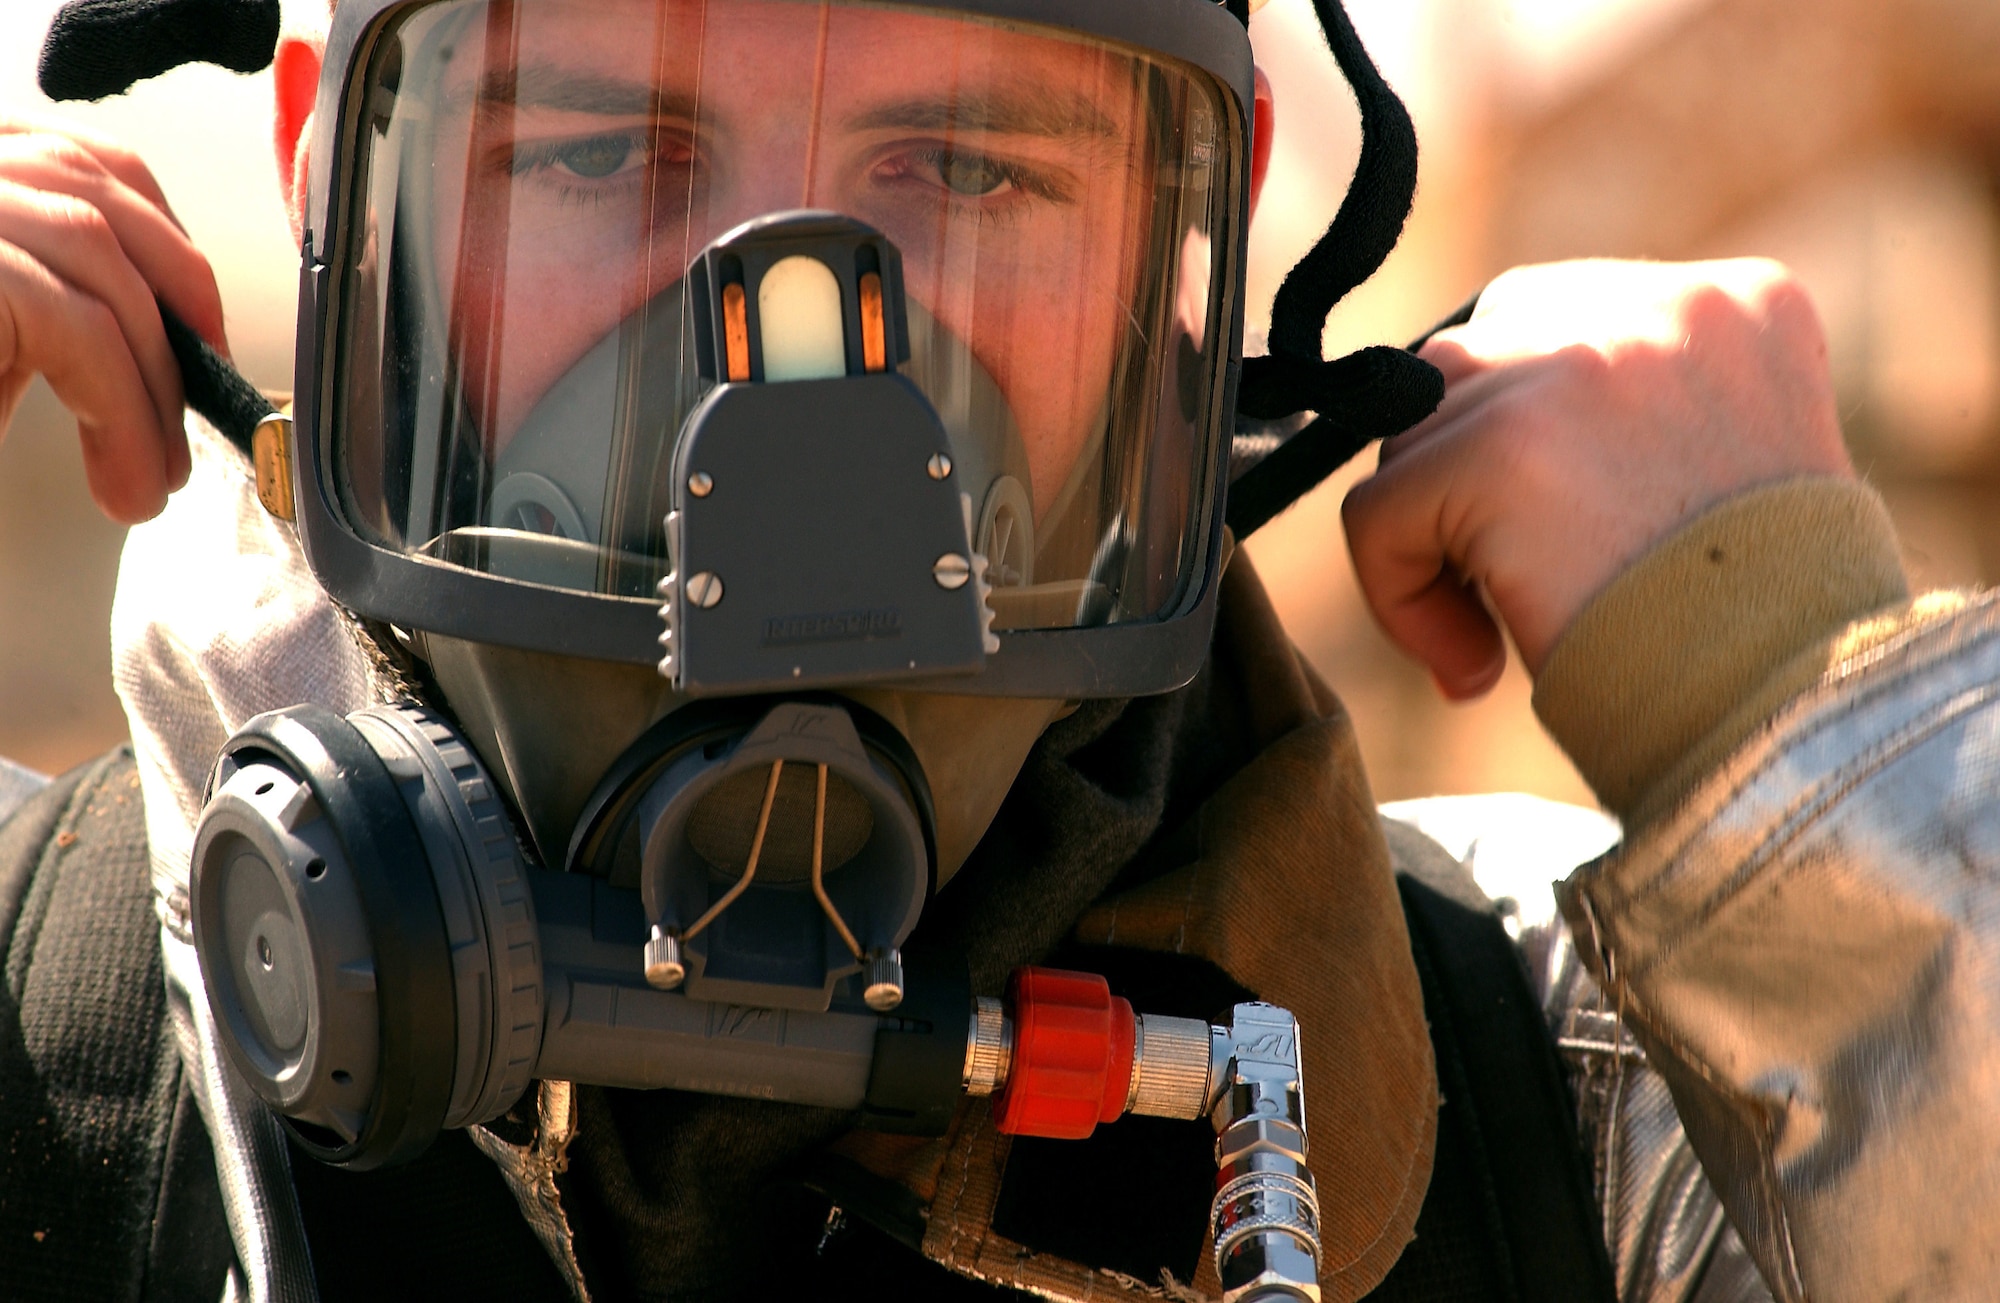 OPERATION ENDURING FREEDOM  --  Senior Airman Michael Campbell checks for a seal on his oxygen mask during a joint fire rescue exercise at an Enduring Freedom forward deployed locaiton.  Campbell is a firefighter with the 320th Expeditionairy Civil Engineering Squadron.  (U.S. Air Force photo by Staff Sgt. Matthew Hannen)